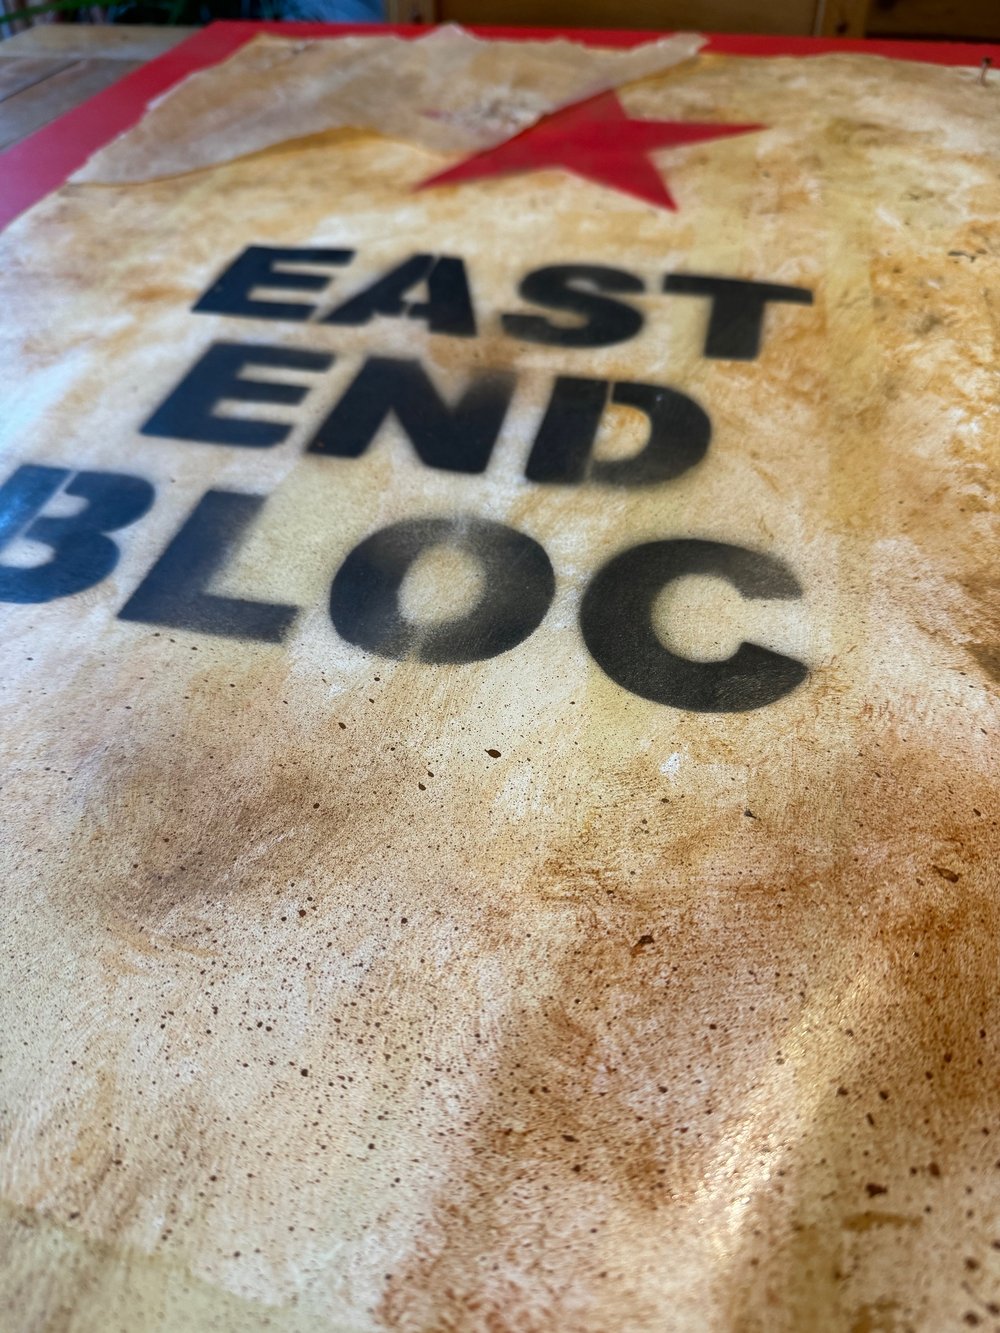 Image of EAST END BLOC